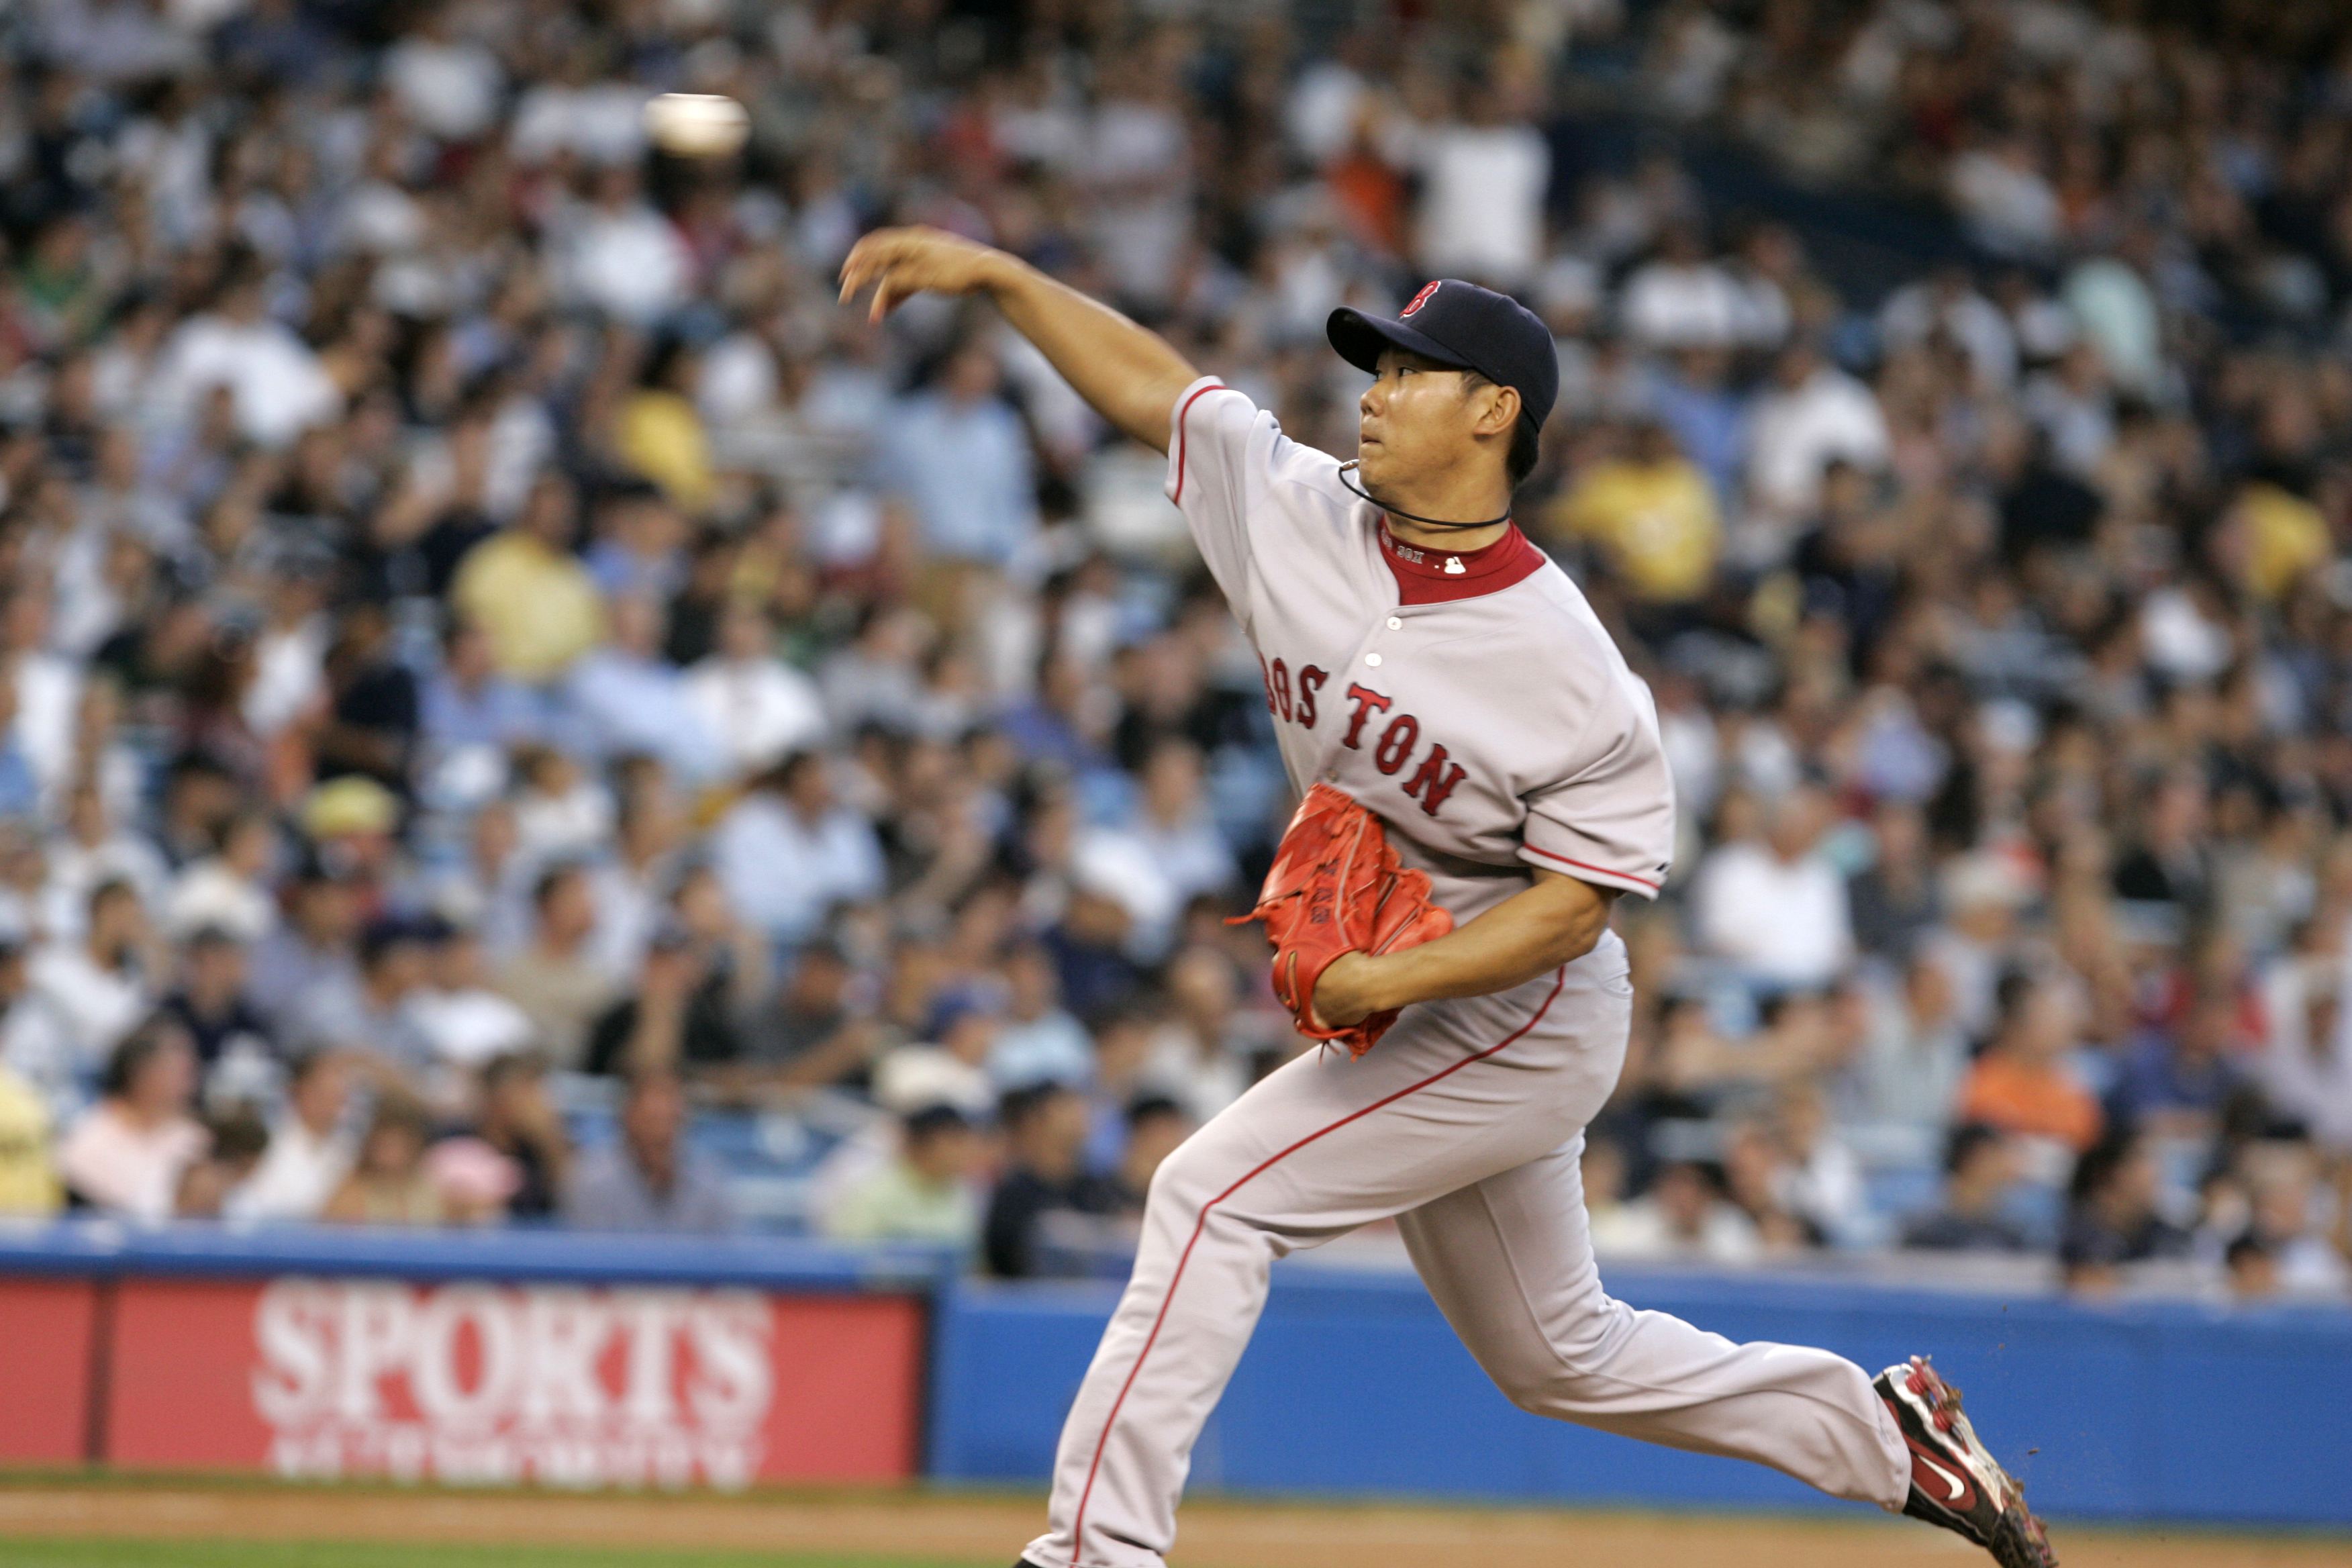 The Wasted Potential of Greg Maddux